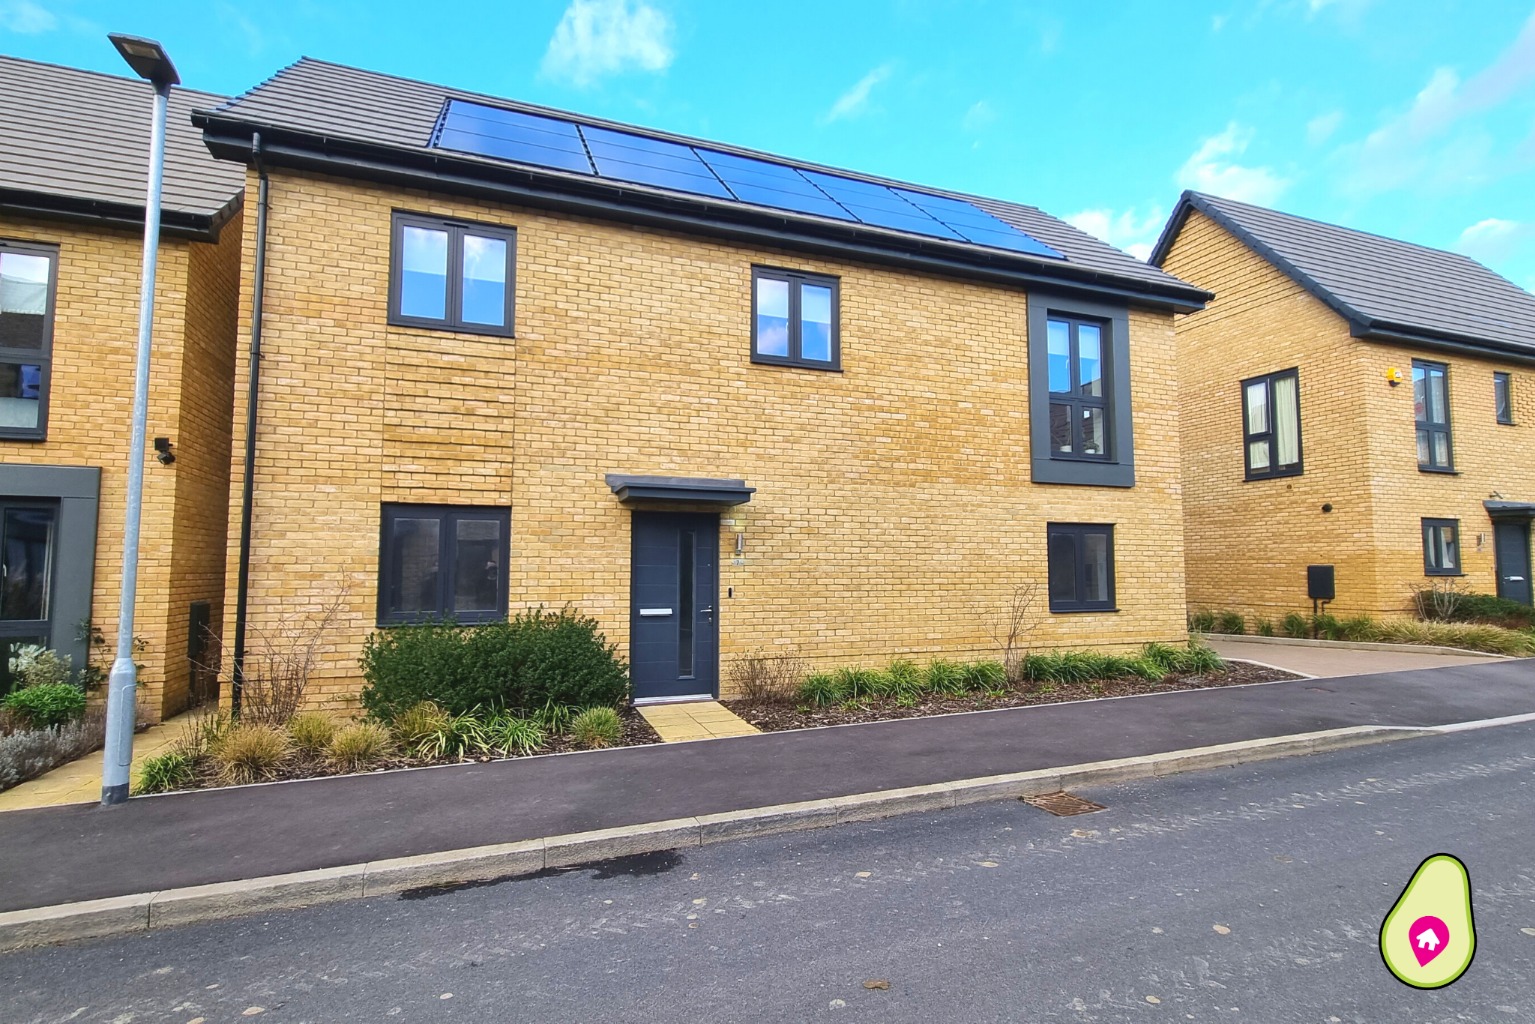 This impressive  coach house is in immaculate condition.  Not only does it have two double bedrooms but also comes with parking for two cars. The home offers open plan living accommodation and is bright and airy throughout.